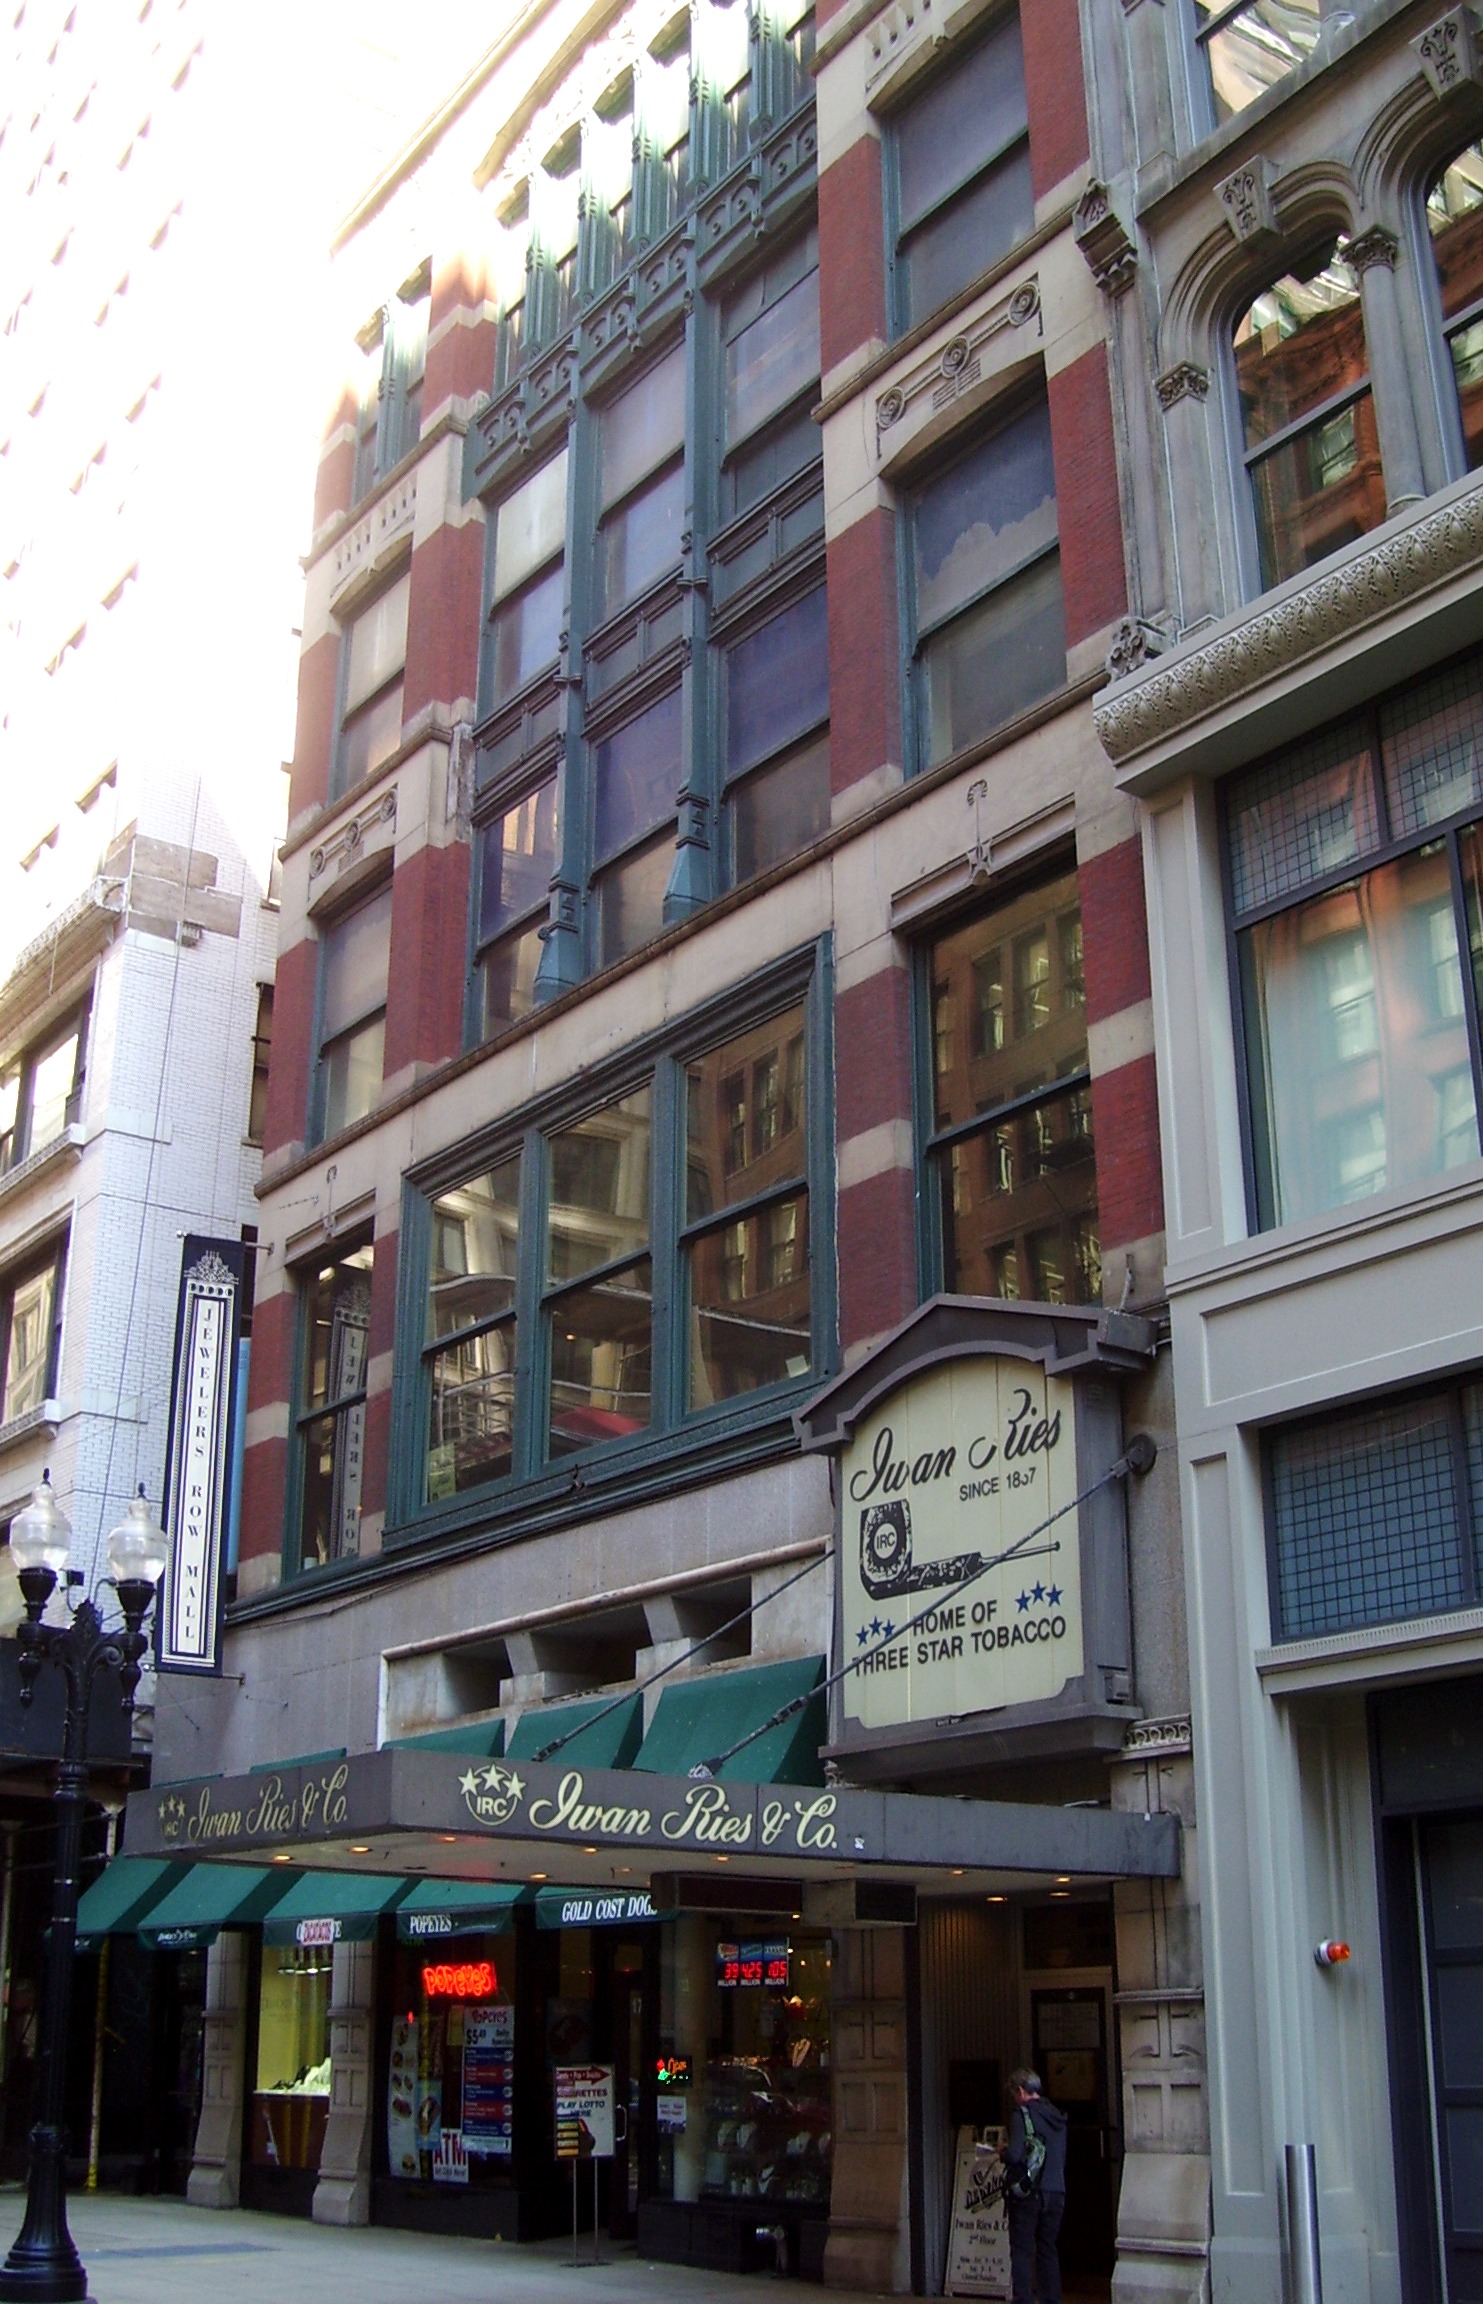 The Jewelers Building at 15 South Wabash Avenue